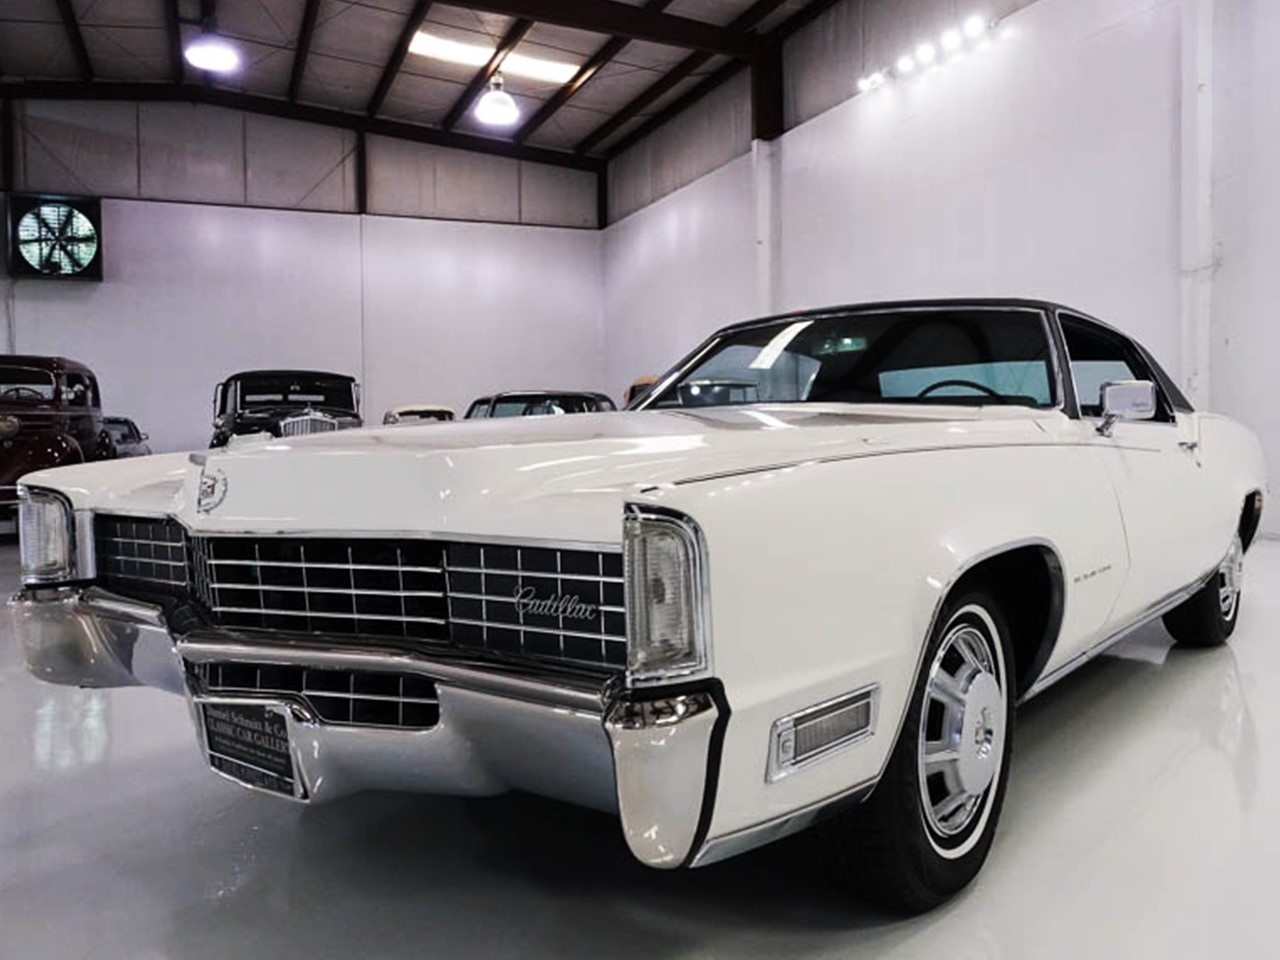 It's Yesterday Once More: The Incomparable 1968 Cadillac Fleetwood Eldorado  – NotoriousLuxury